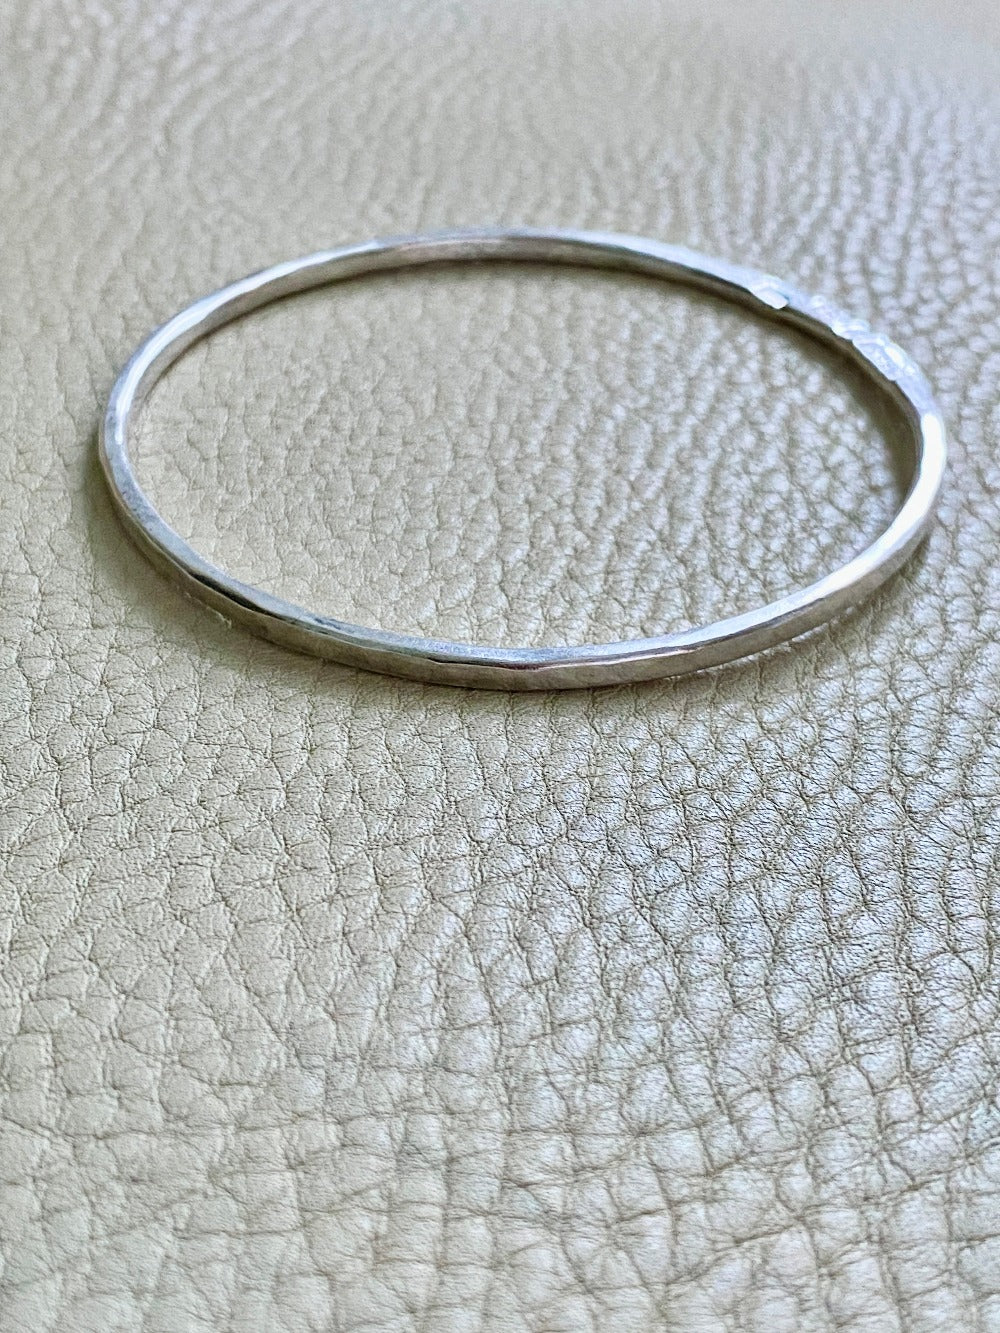 Hand Hammered Vintage Silver Bangle - Interior circumference 8.25 inches